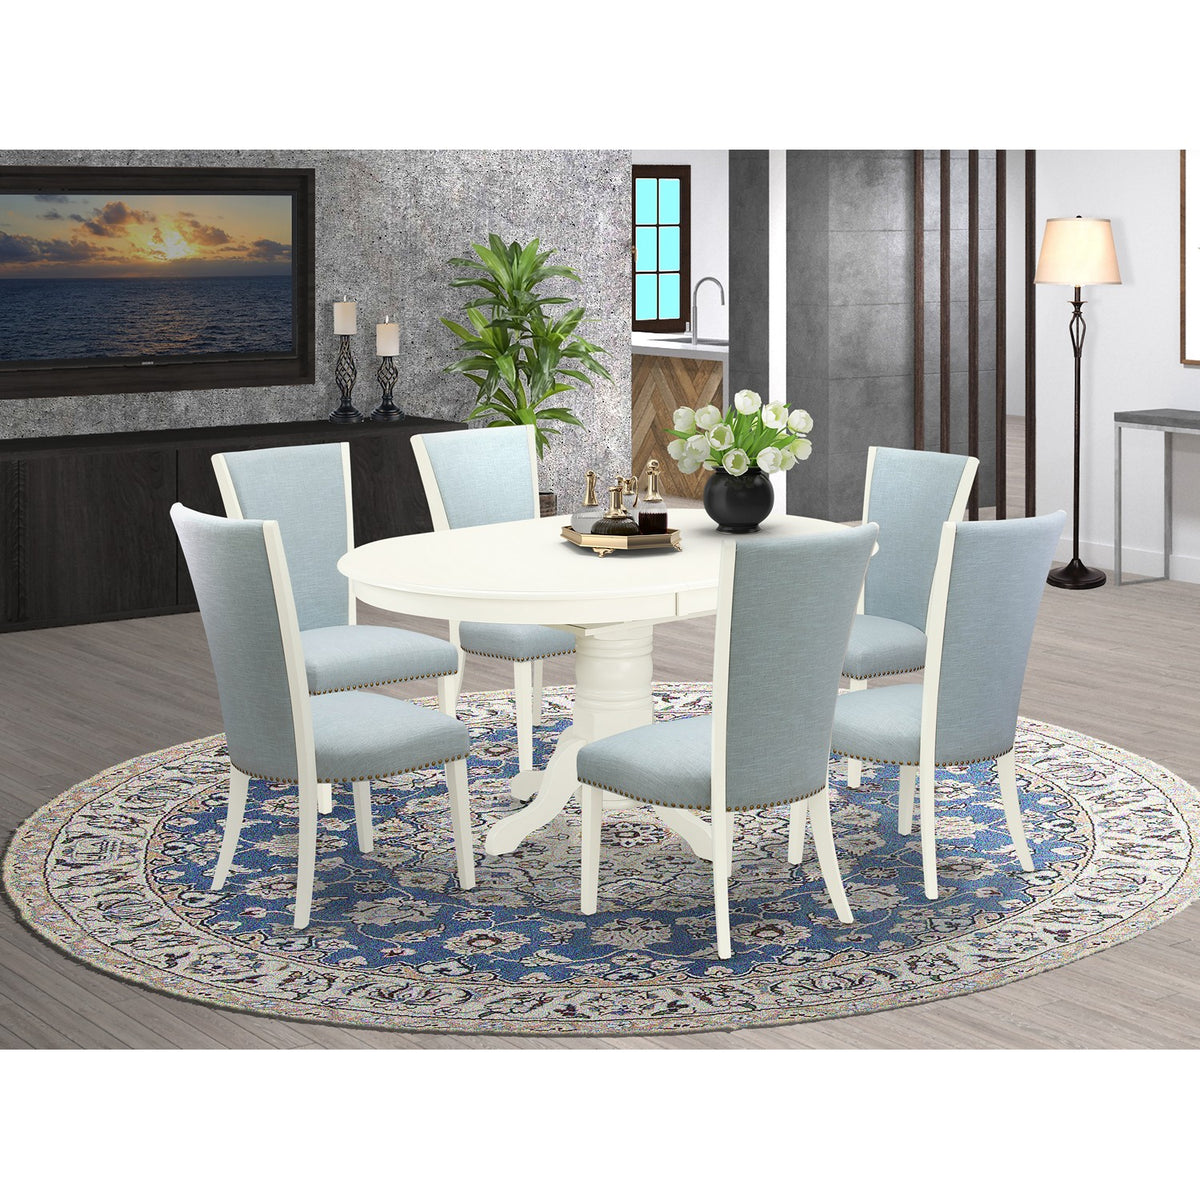 7pc Dining Set, Avon 42x60 oval pedestal table + 6 padded chairs in linen  white